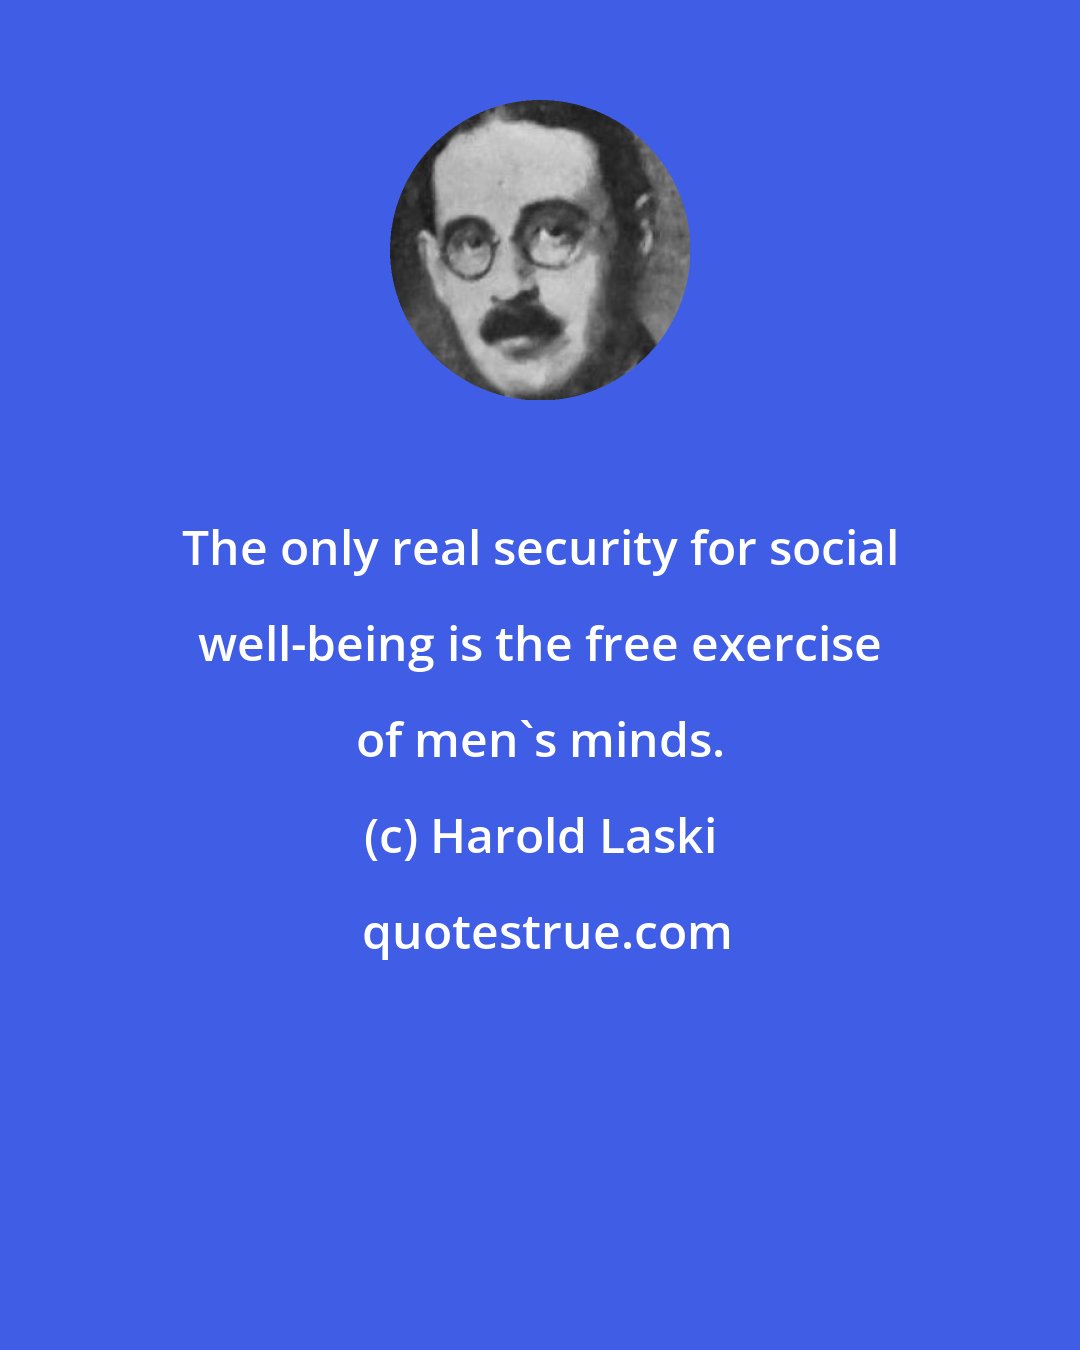 Harold Laski: The only real security for social well-being is the free exercise of men's minds.